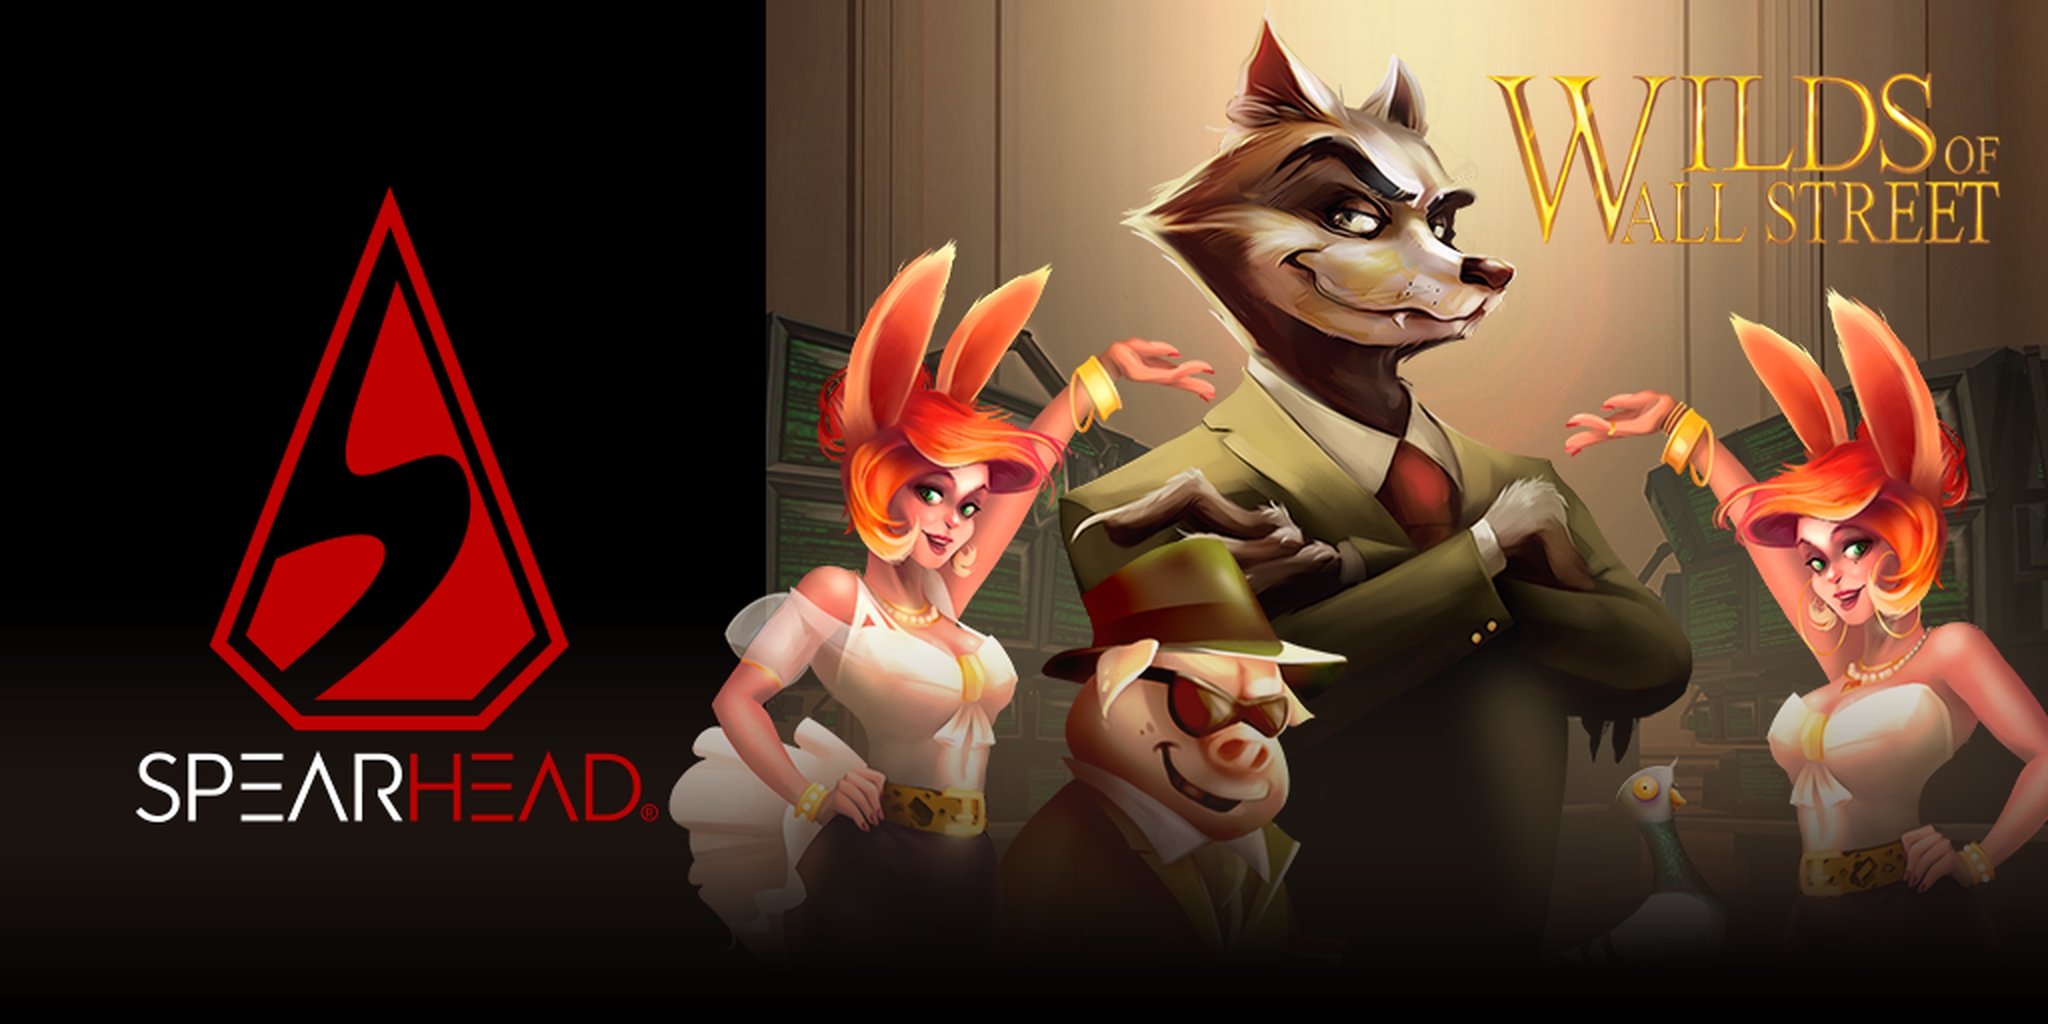 The Wilds of Wall Street Online Slot Demo Game by Spearhead Studios